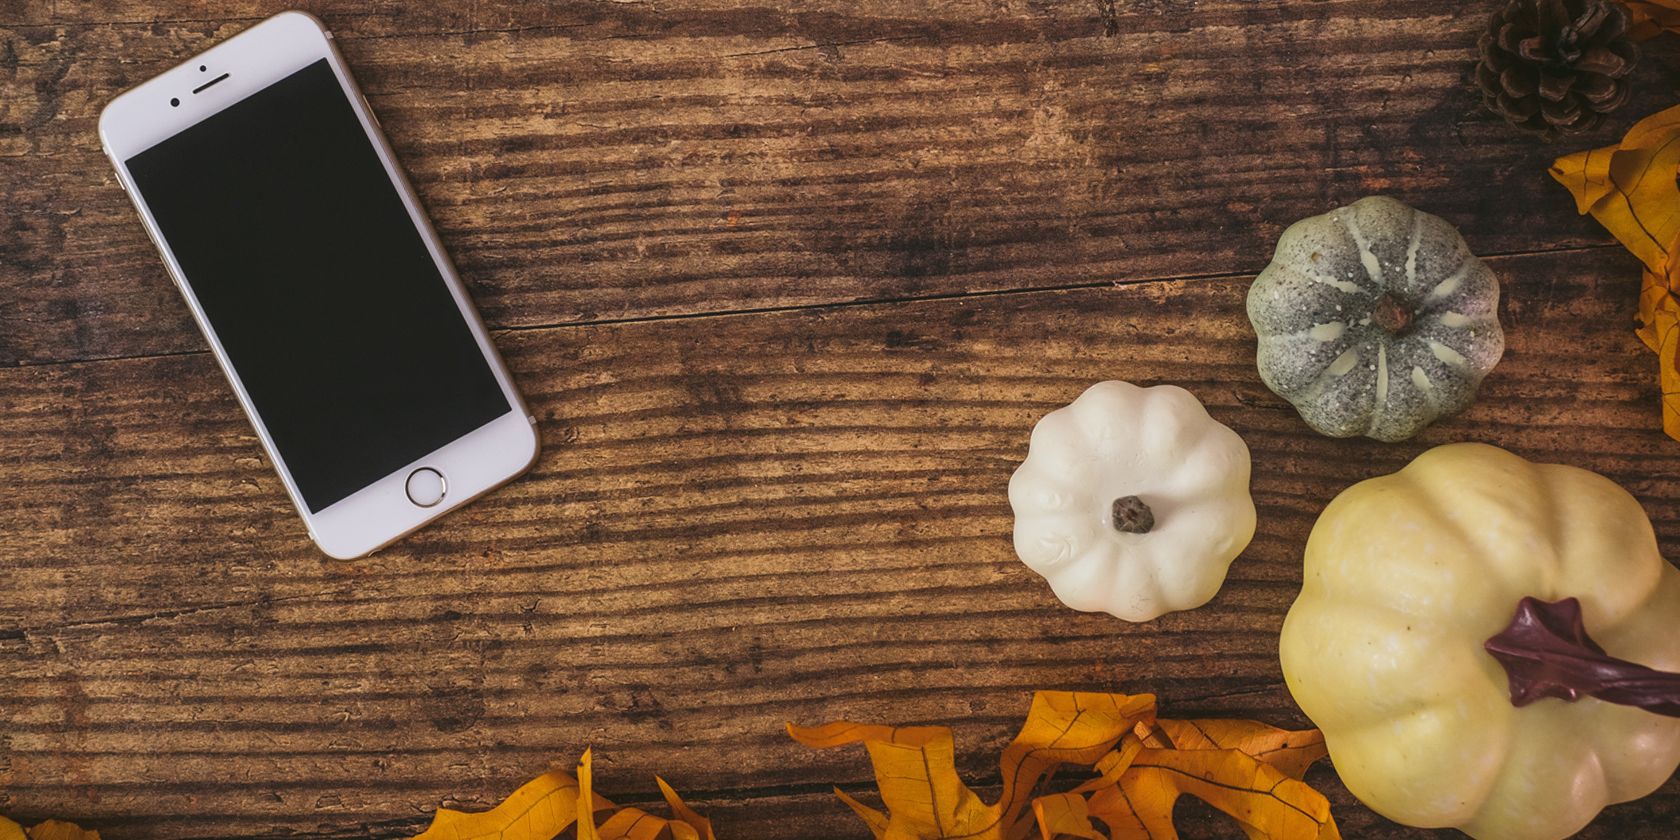 iPhone on wooden table, with small pumpkins and brown leaves nearby 